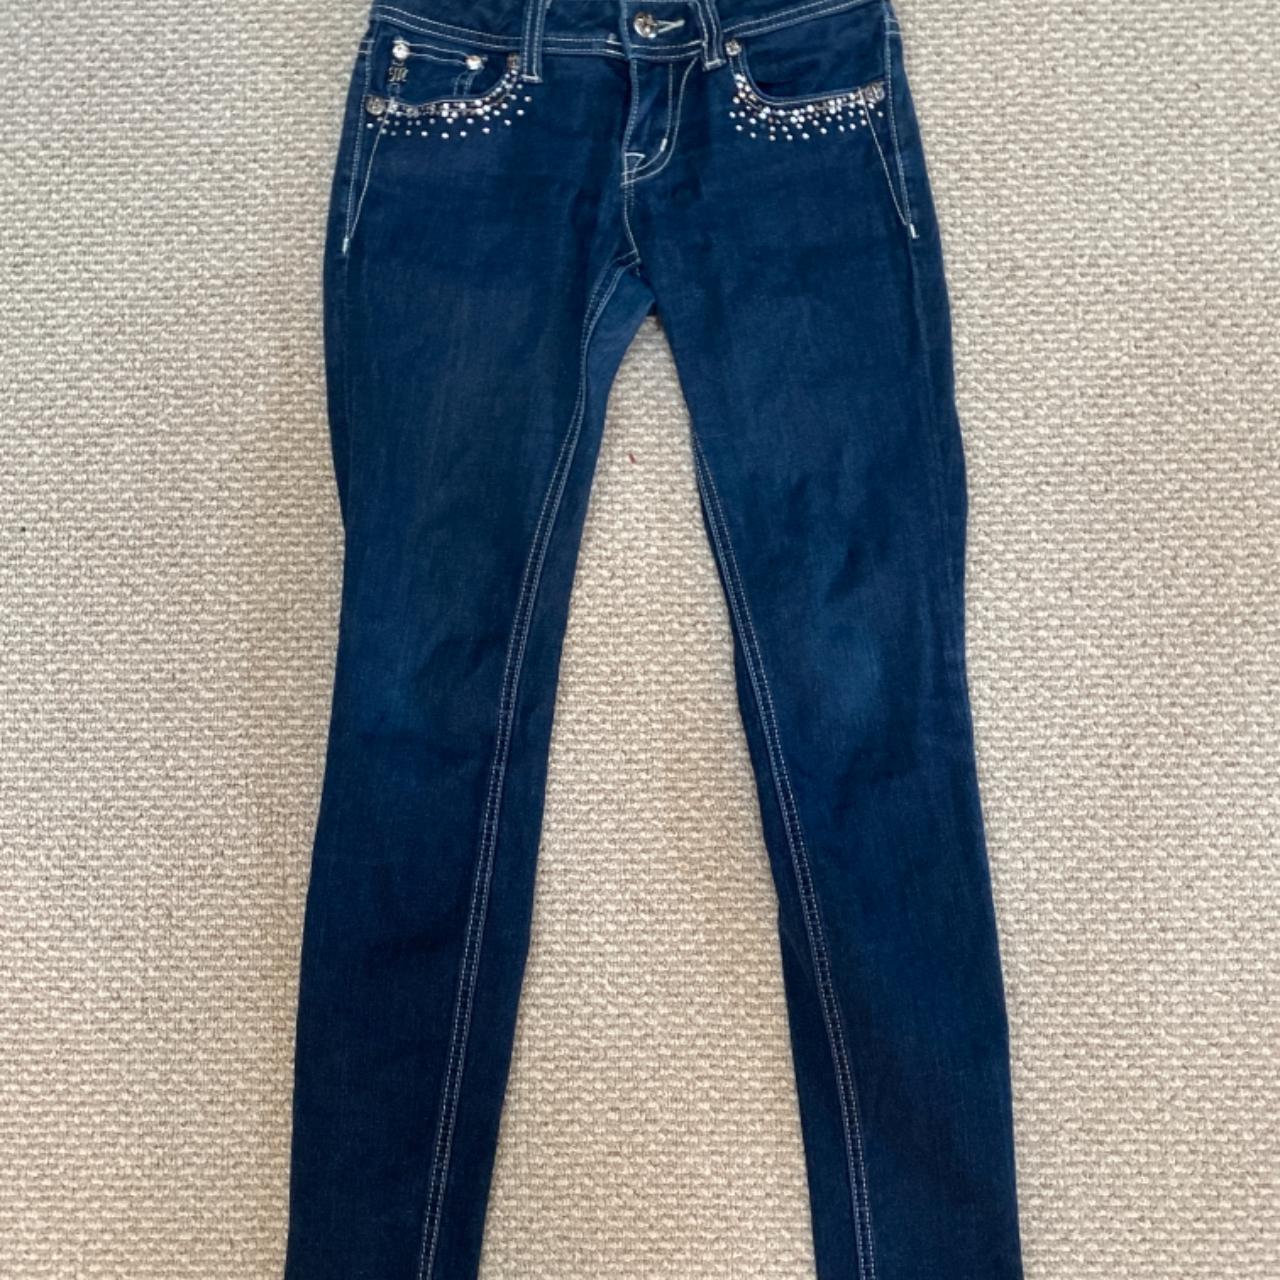 Low rise Miss me 2000s jeans, no damage whatsoever,... - Depop